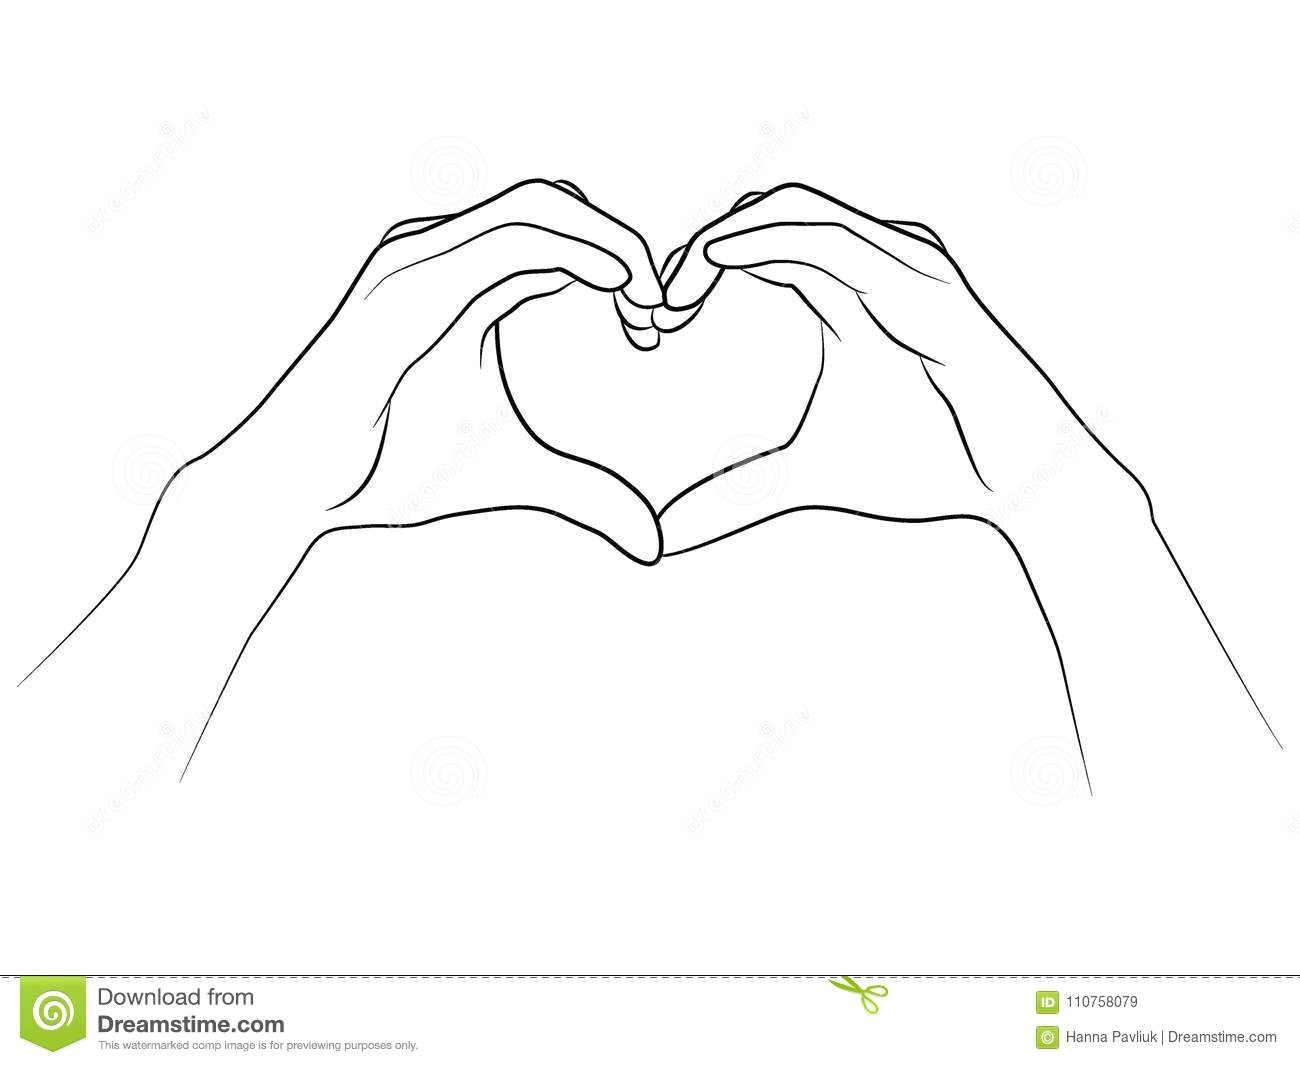 Drawings Of Hands together Hands Folded together In the Shape Of A Heart Stock Vector